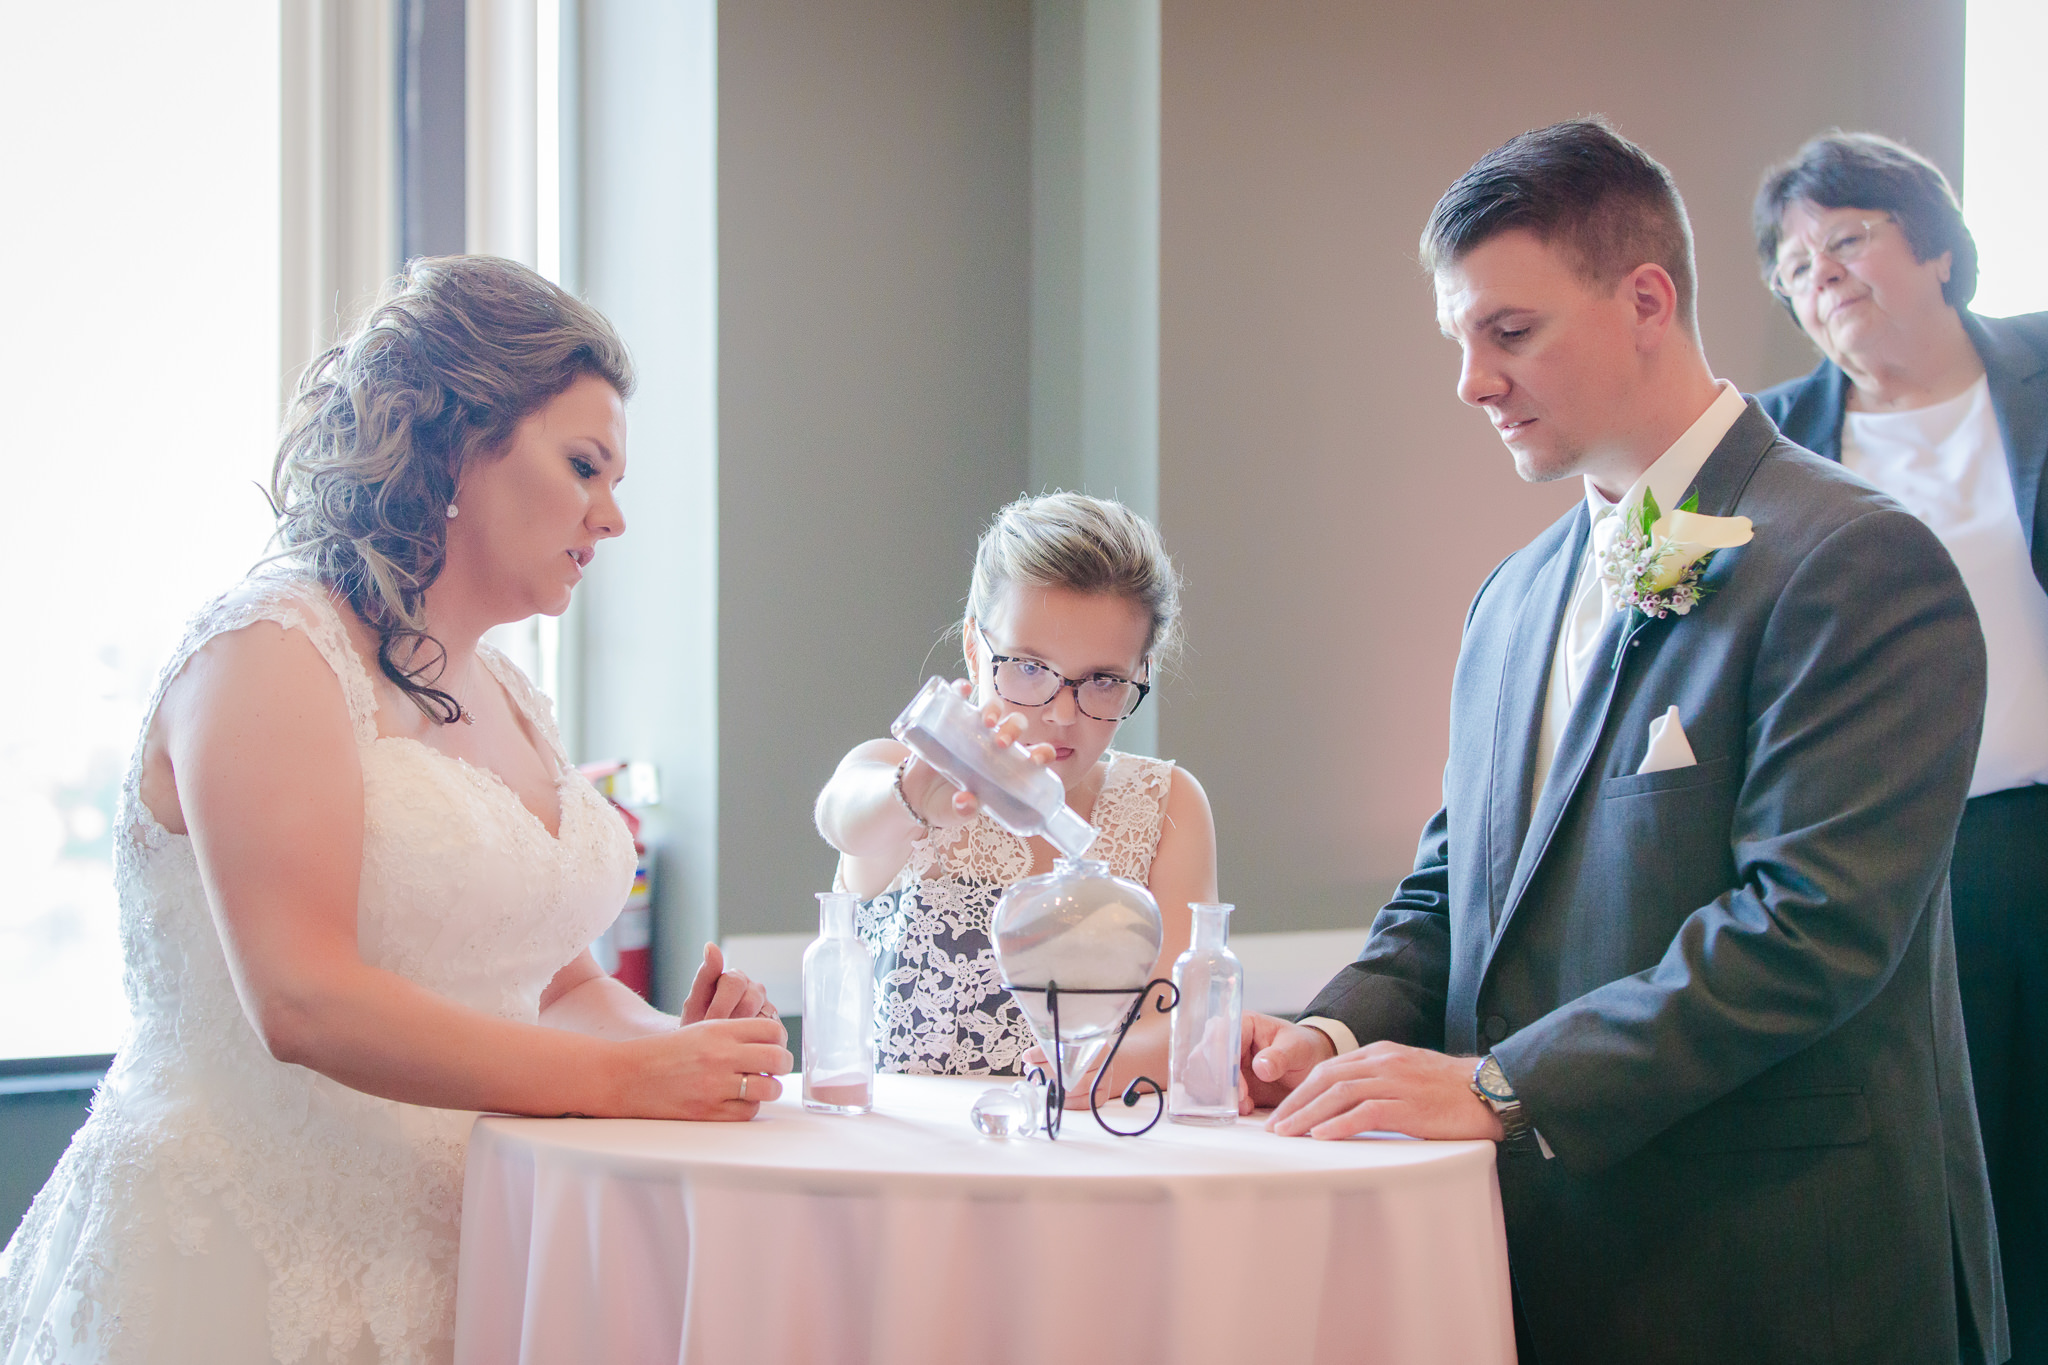 Groom's daughter pours sand during the unity ceremony at Chestnut Ridge Golf Resort